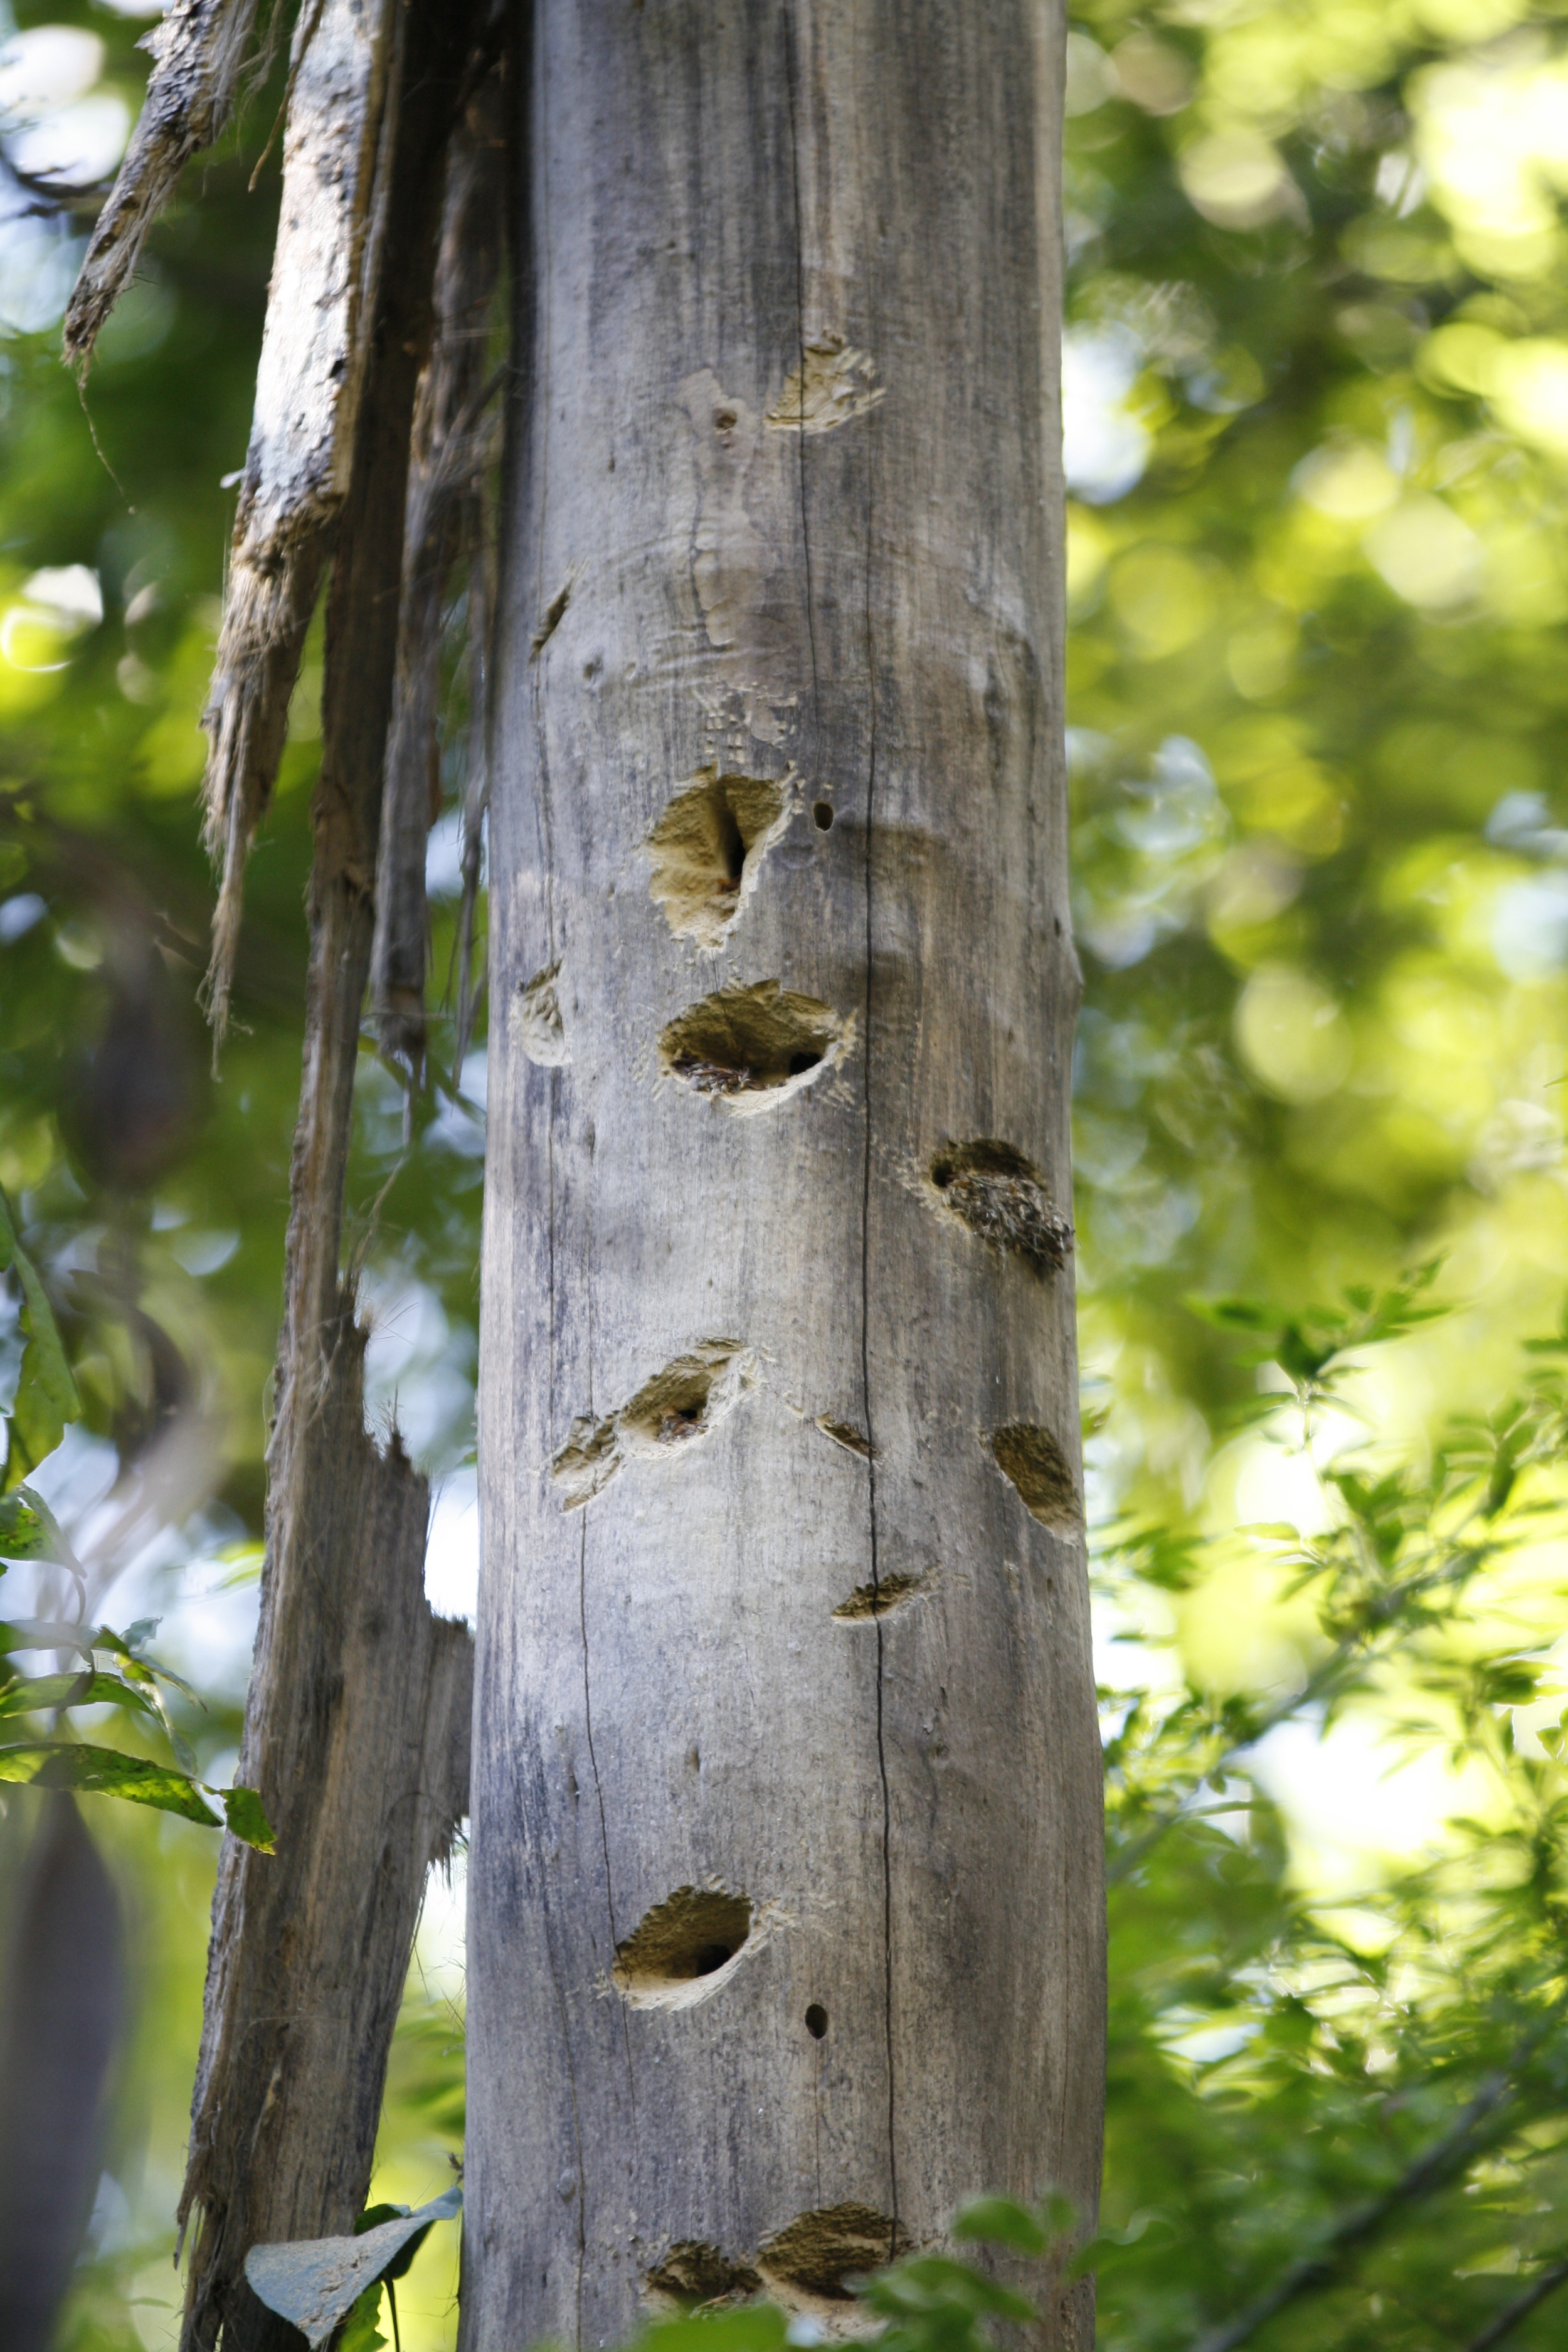  Gnaw marks on dead tree from aye-aye foraging for the larvae of wood-boring insects, Daraina, Madagascar 